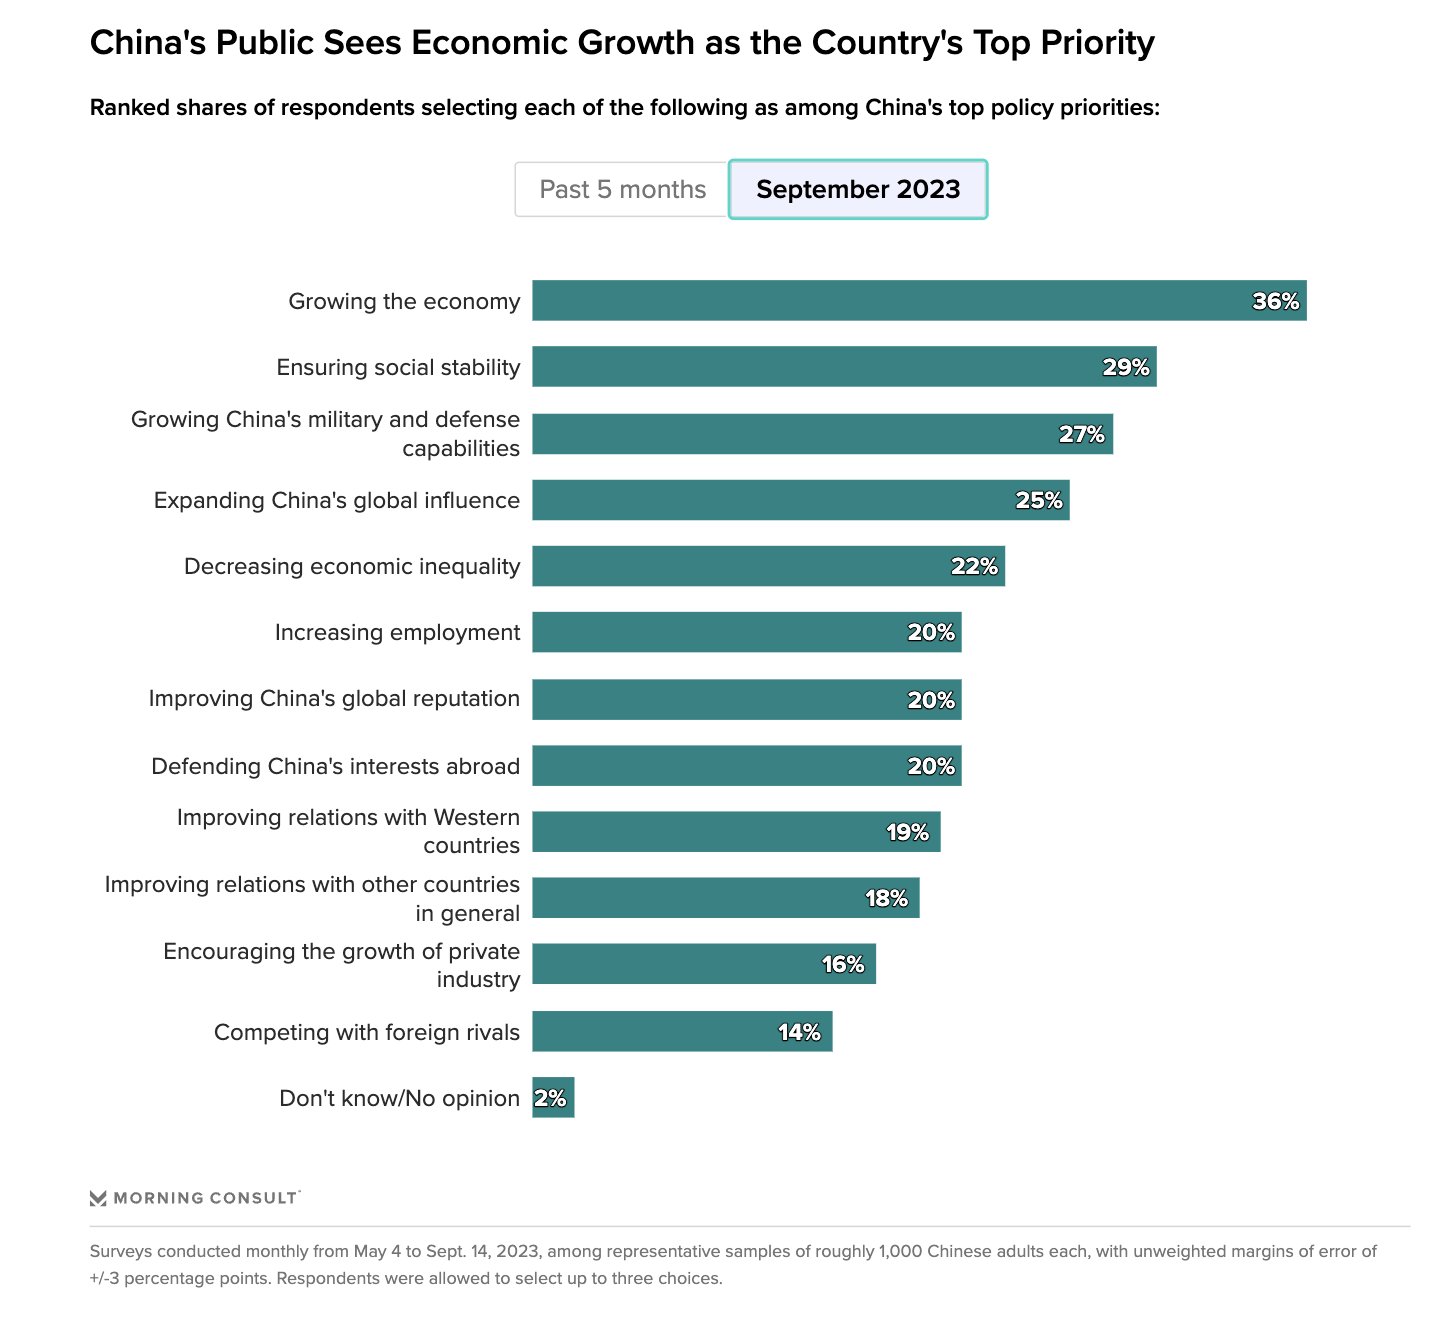 Appealing to China a top priority 